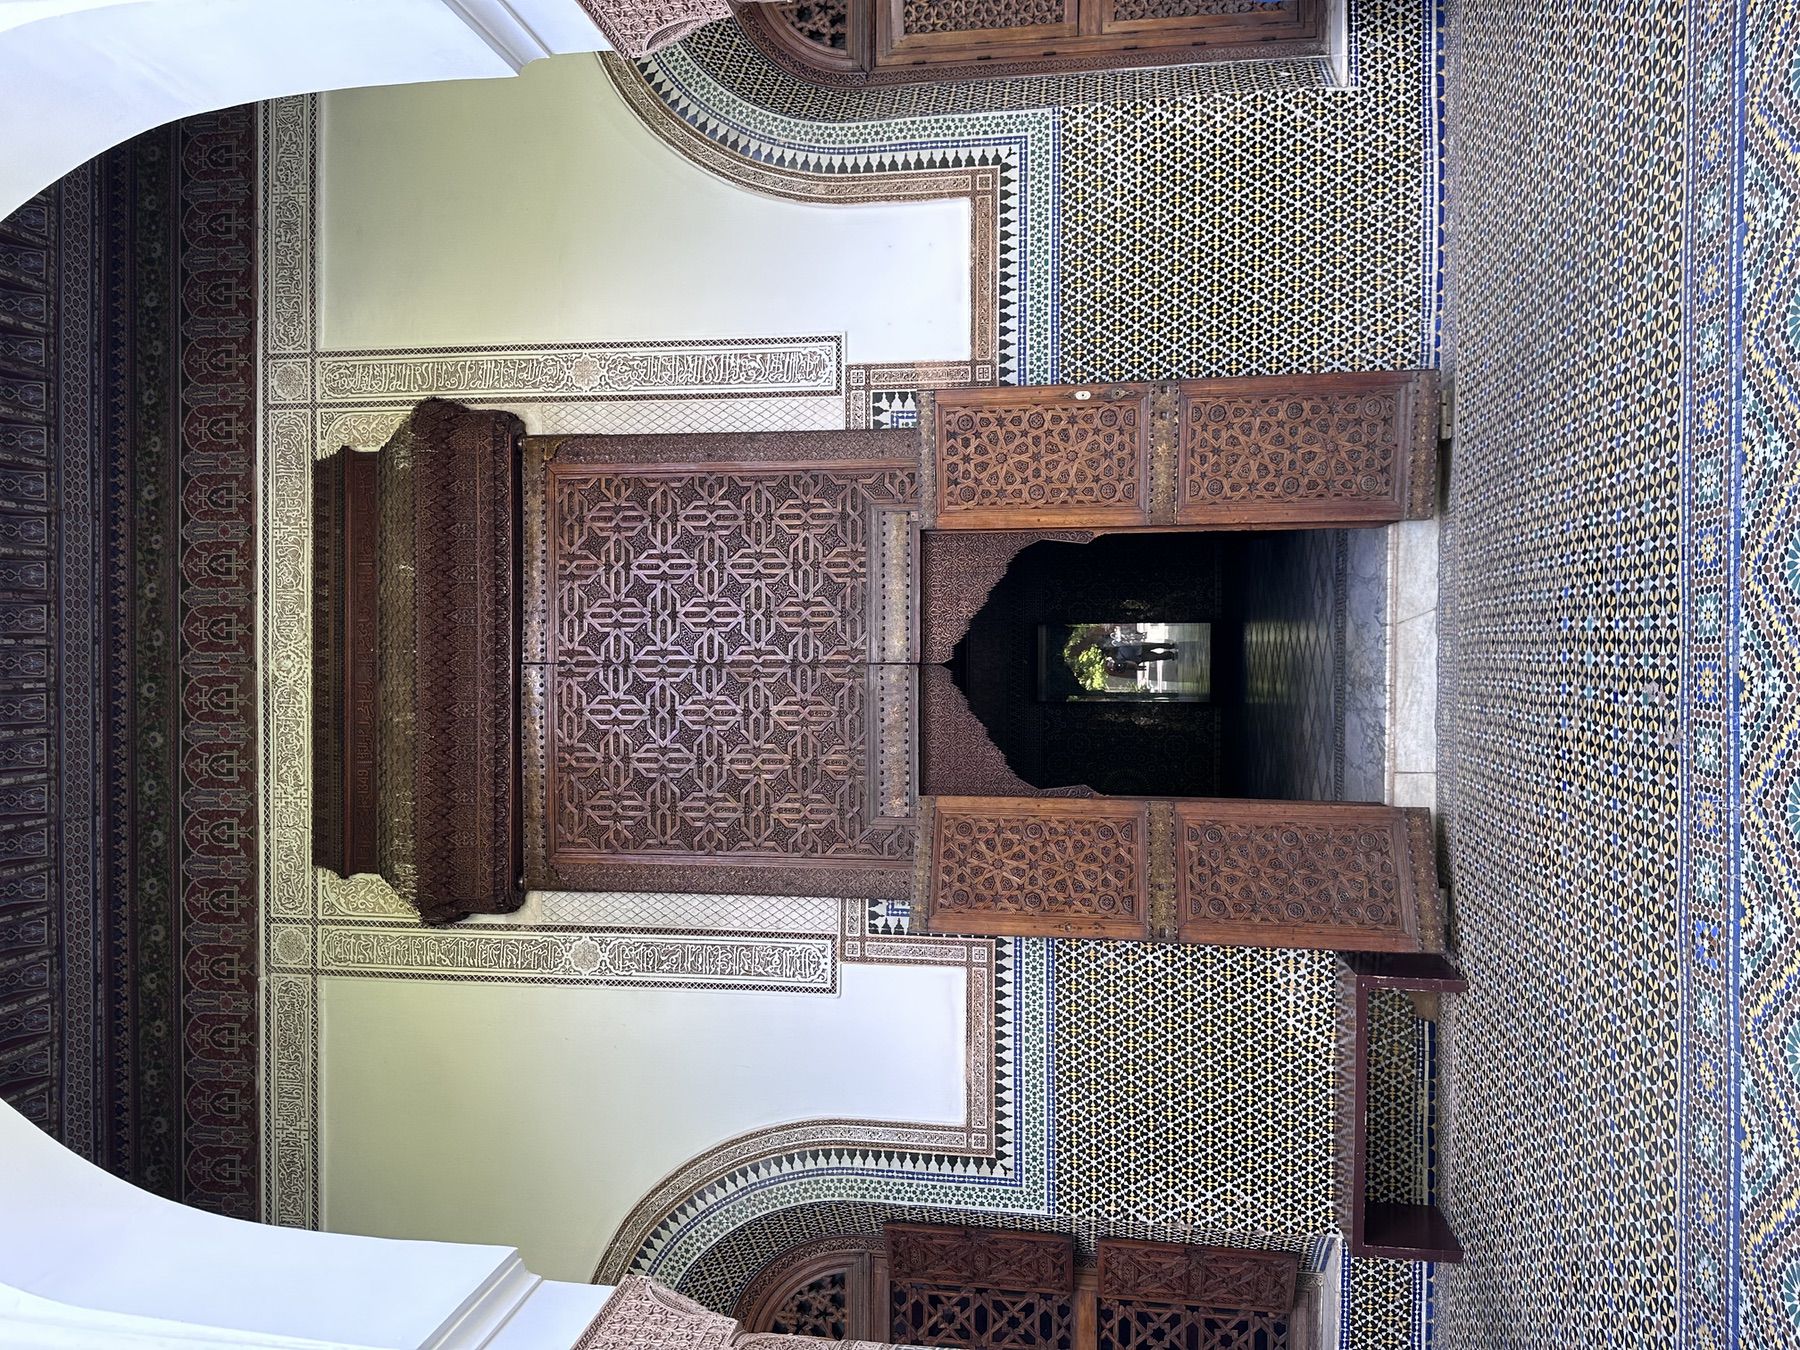 <p>View to a portal with carved wood doors, frame with carved stucco, zellij flooring, and painted wood ceiling</p>